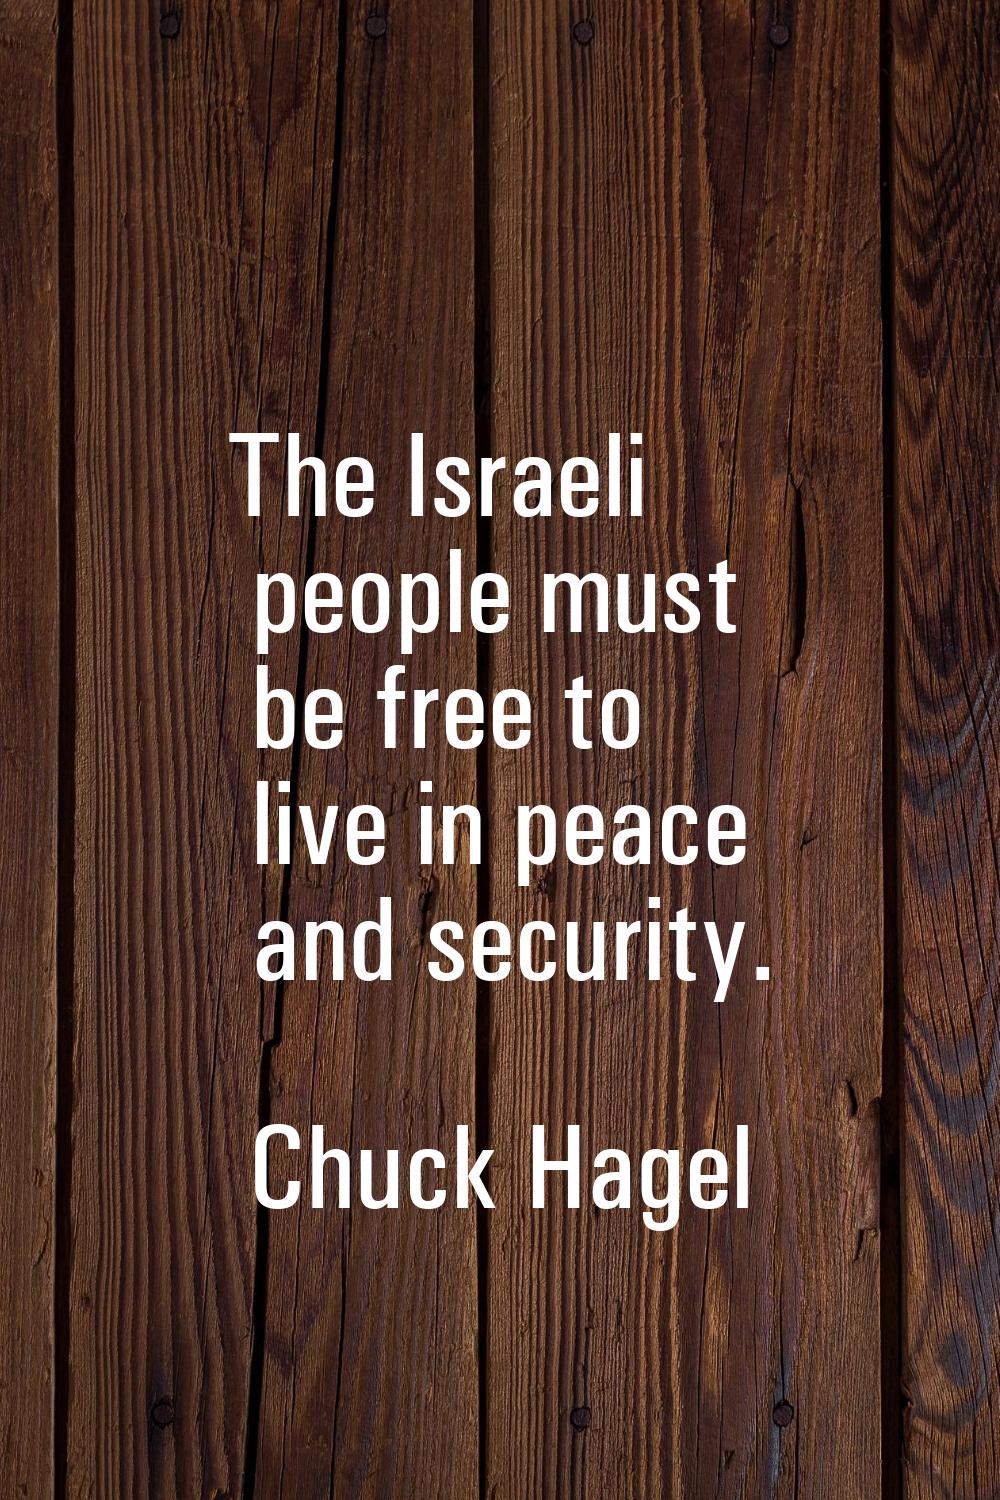 The Israeli people must be free to live in peace and security.